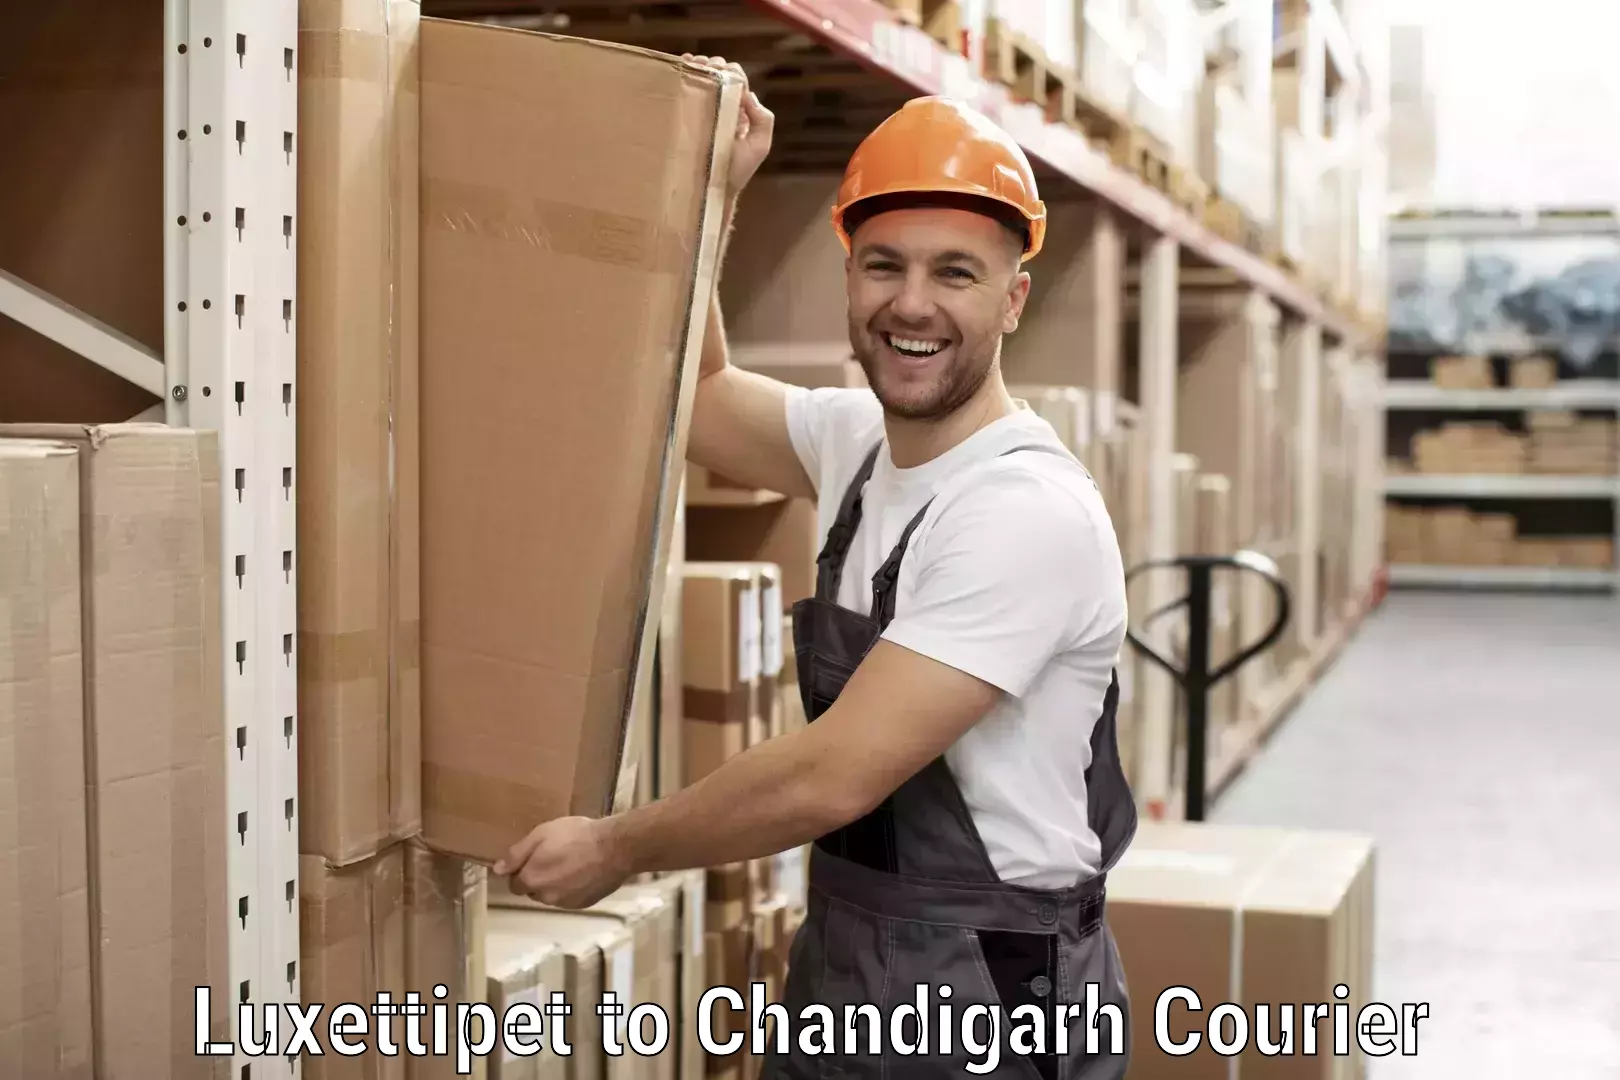 Specialized shipment handling Luxettipet to Chandigarh